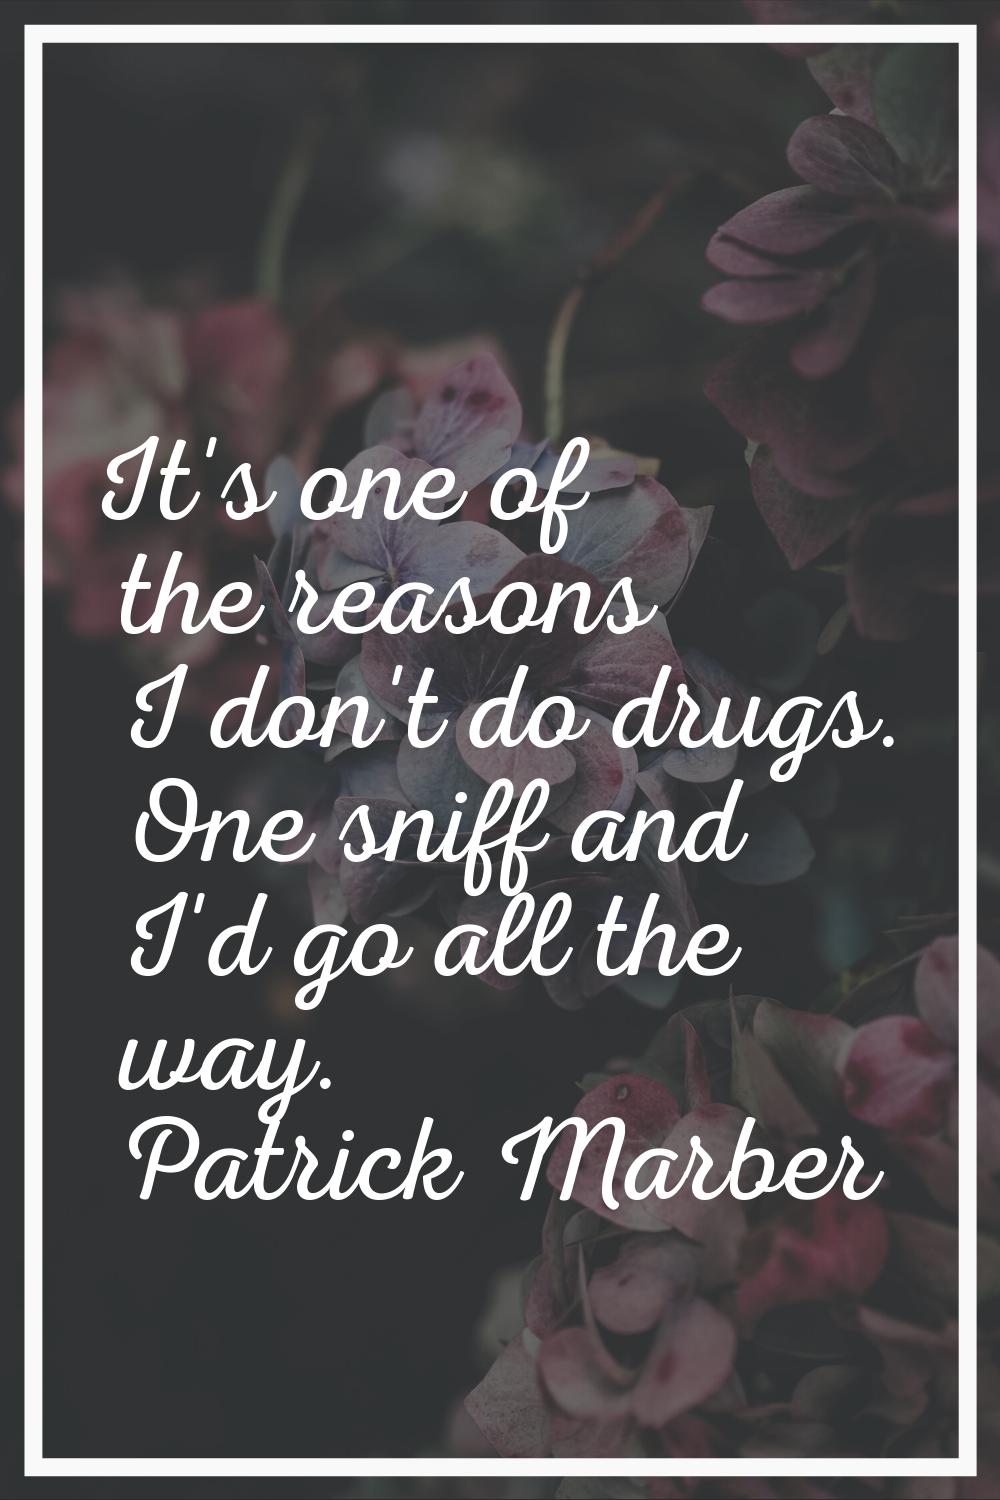 It's one of the reasons I don't do drugs. One sniff and I'd go all the way.